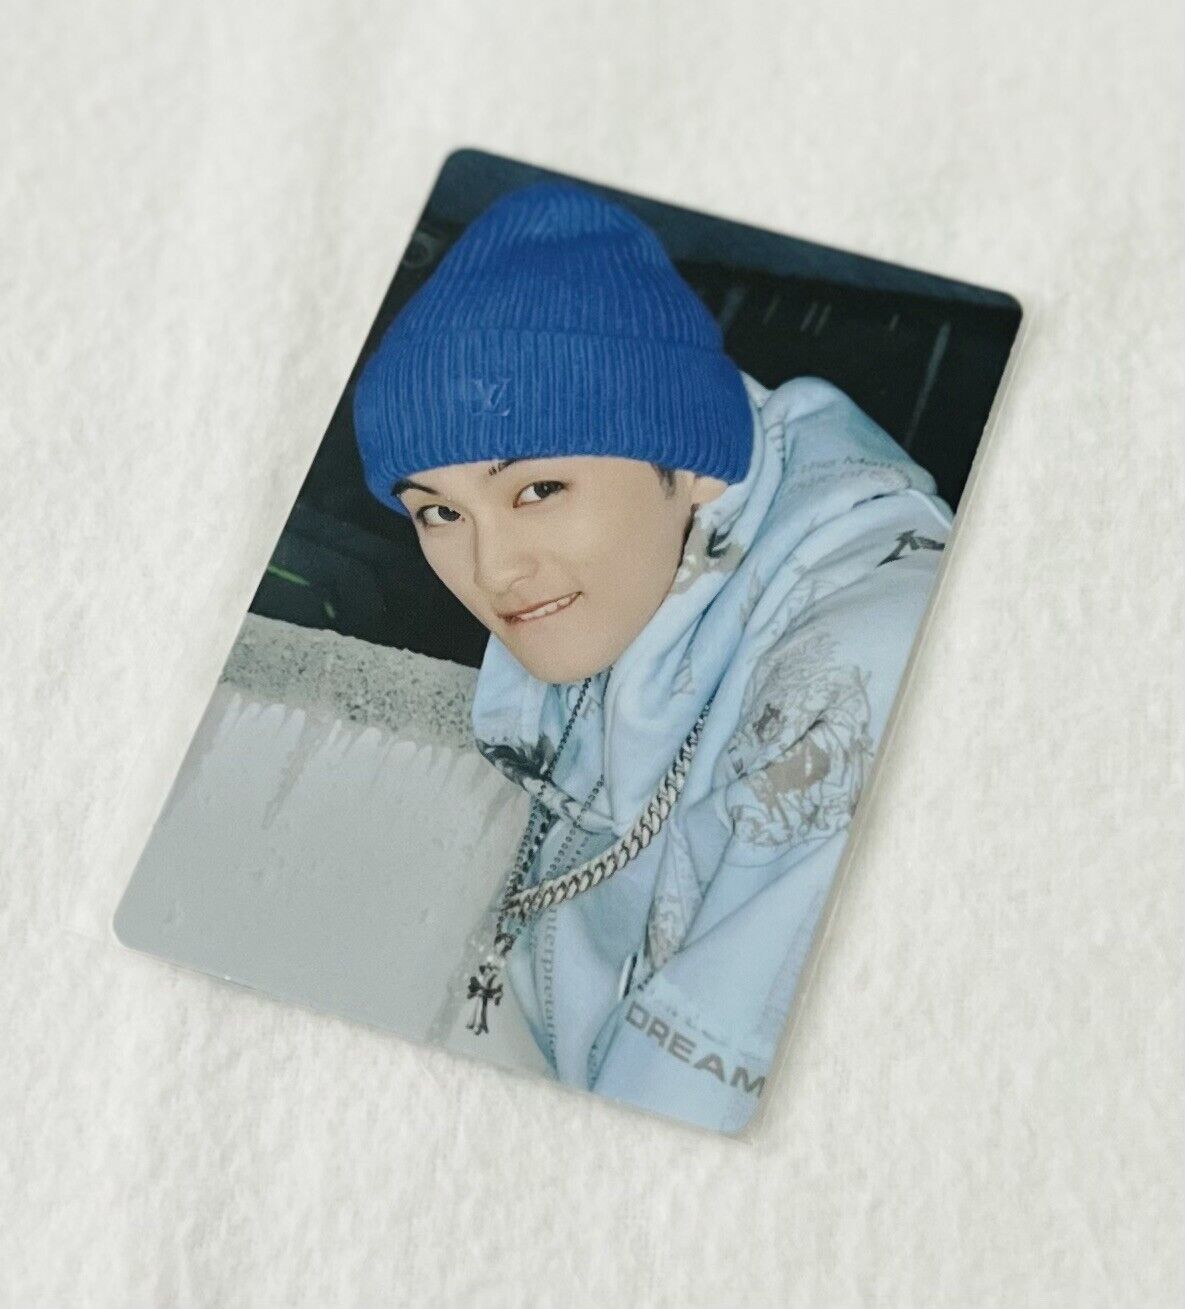 [MARK] NCT DREAM X PINKFONG NCT-REX OFFICIAL MD LOCA MOBILITY CARD + PHOTOCARD Без бренда - фотография #2